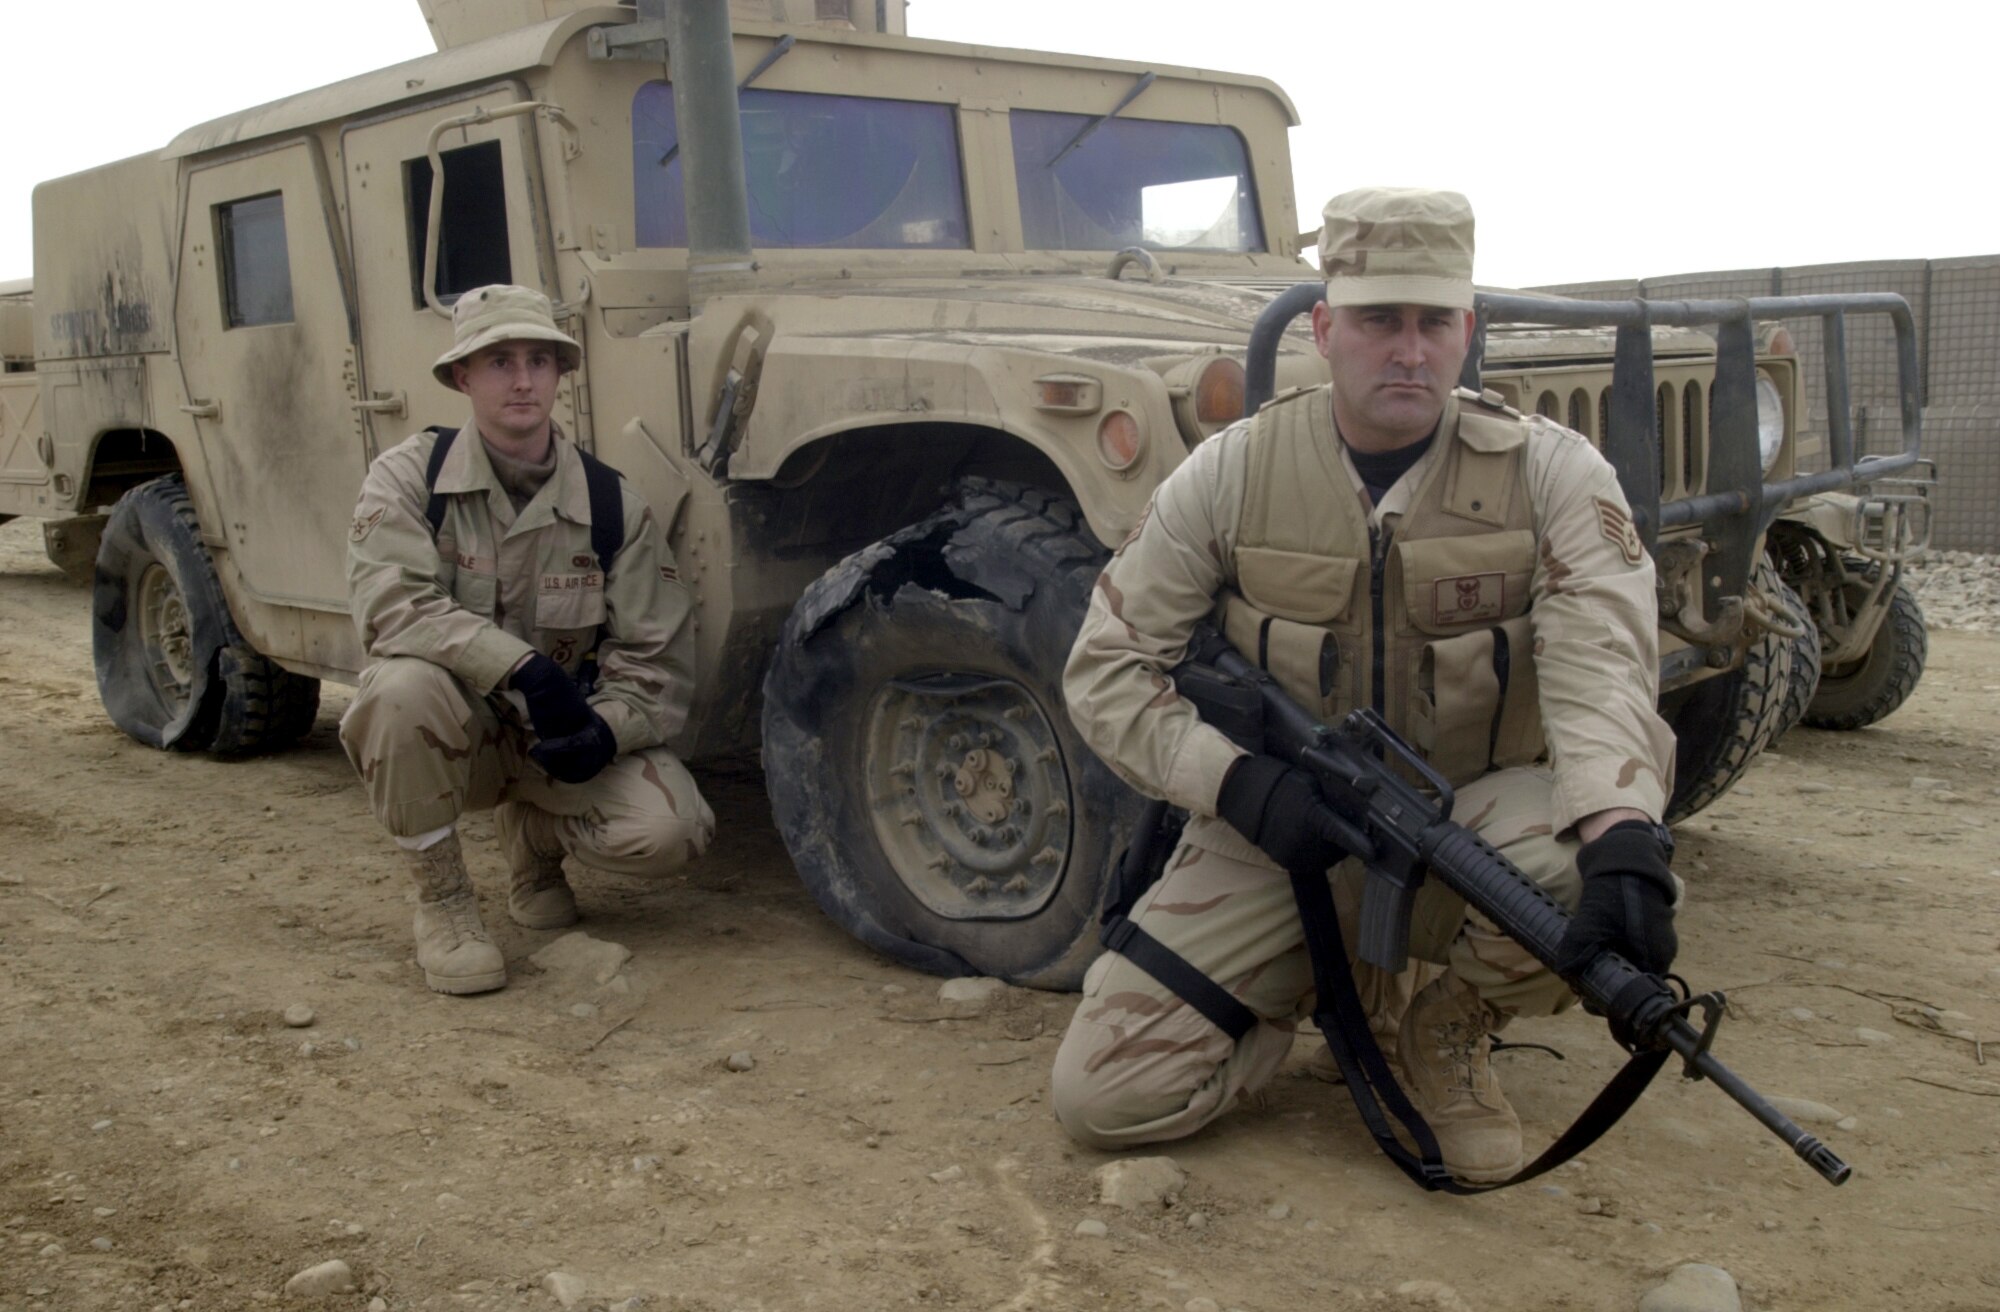 BAGRAM AIR BASE, Afghanistan -- Staff Sgt. Michael Klinkert (right) and Airman 1st Class Christopher Coble were driving this heavily armored Humvee at about 8 p.m. Jan. 5 when they entered an unmarked minefield here.  Explosions rocked the vehicle and they were stranded for about two hours until a mine-clearing vehicle was sent in.  Sergeant Klinkert and Airman Coble are security forces specialists assigned to the 455th Expeditionary Operations Group here.  Both are deployed from Holloman Air Force Base, N.M.  (U.S. Air Force photo by Tech. Sgt. Brian Davidson)